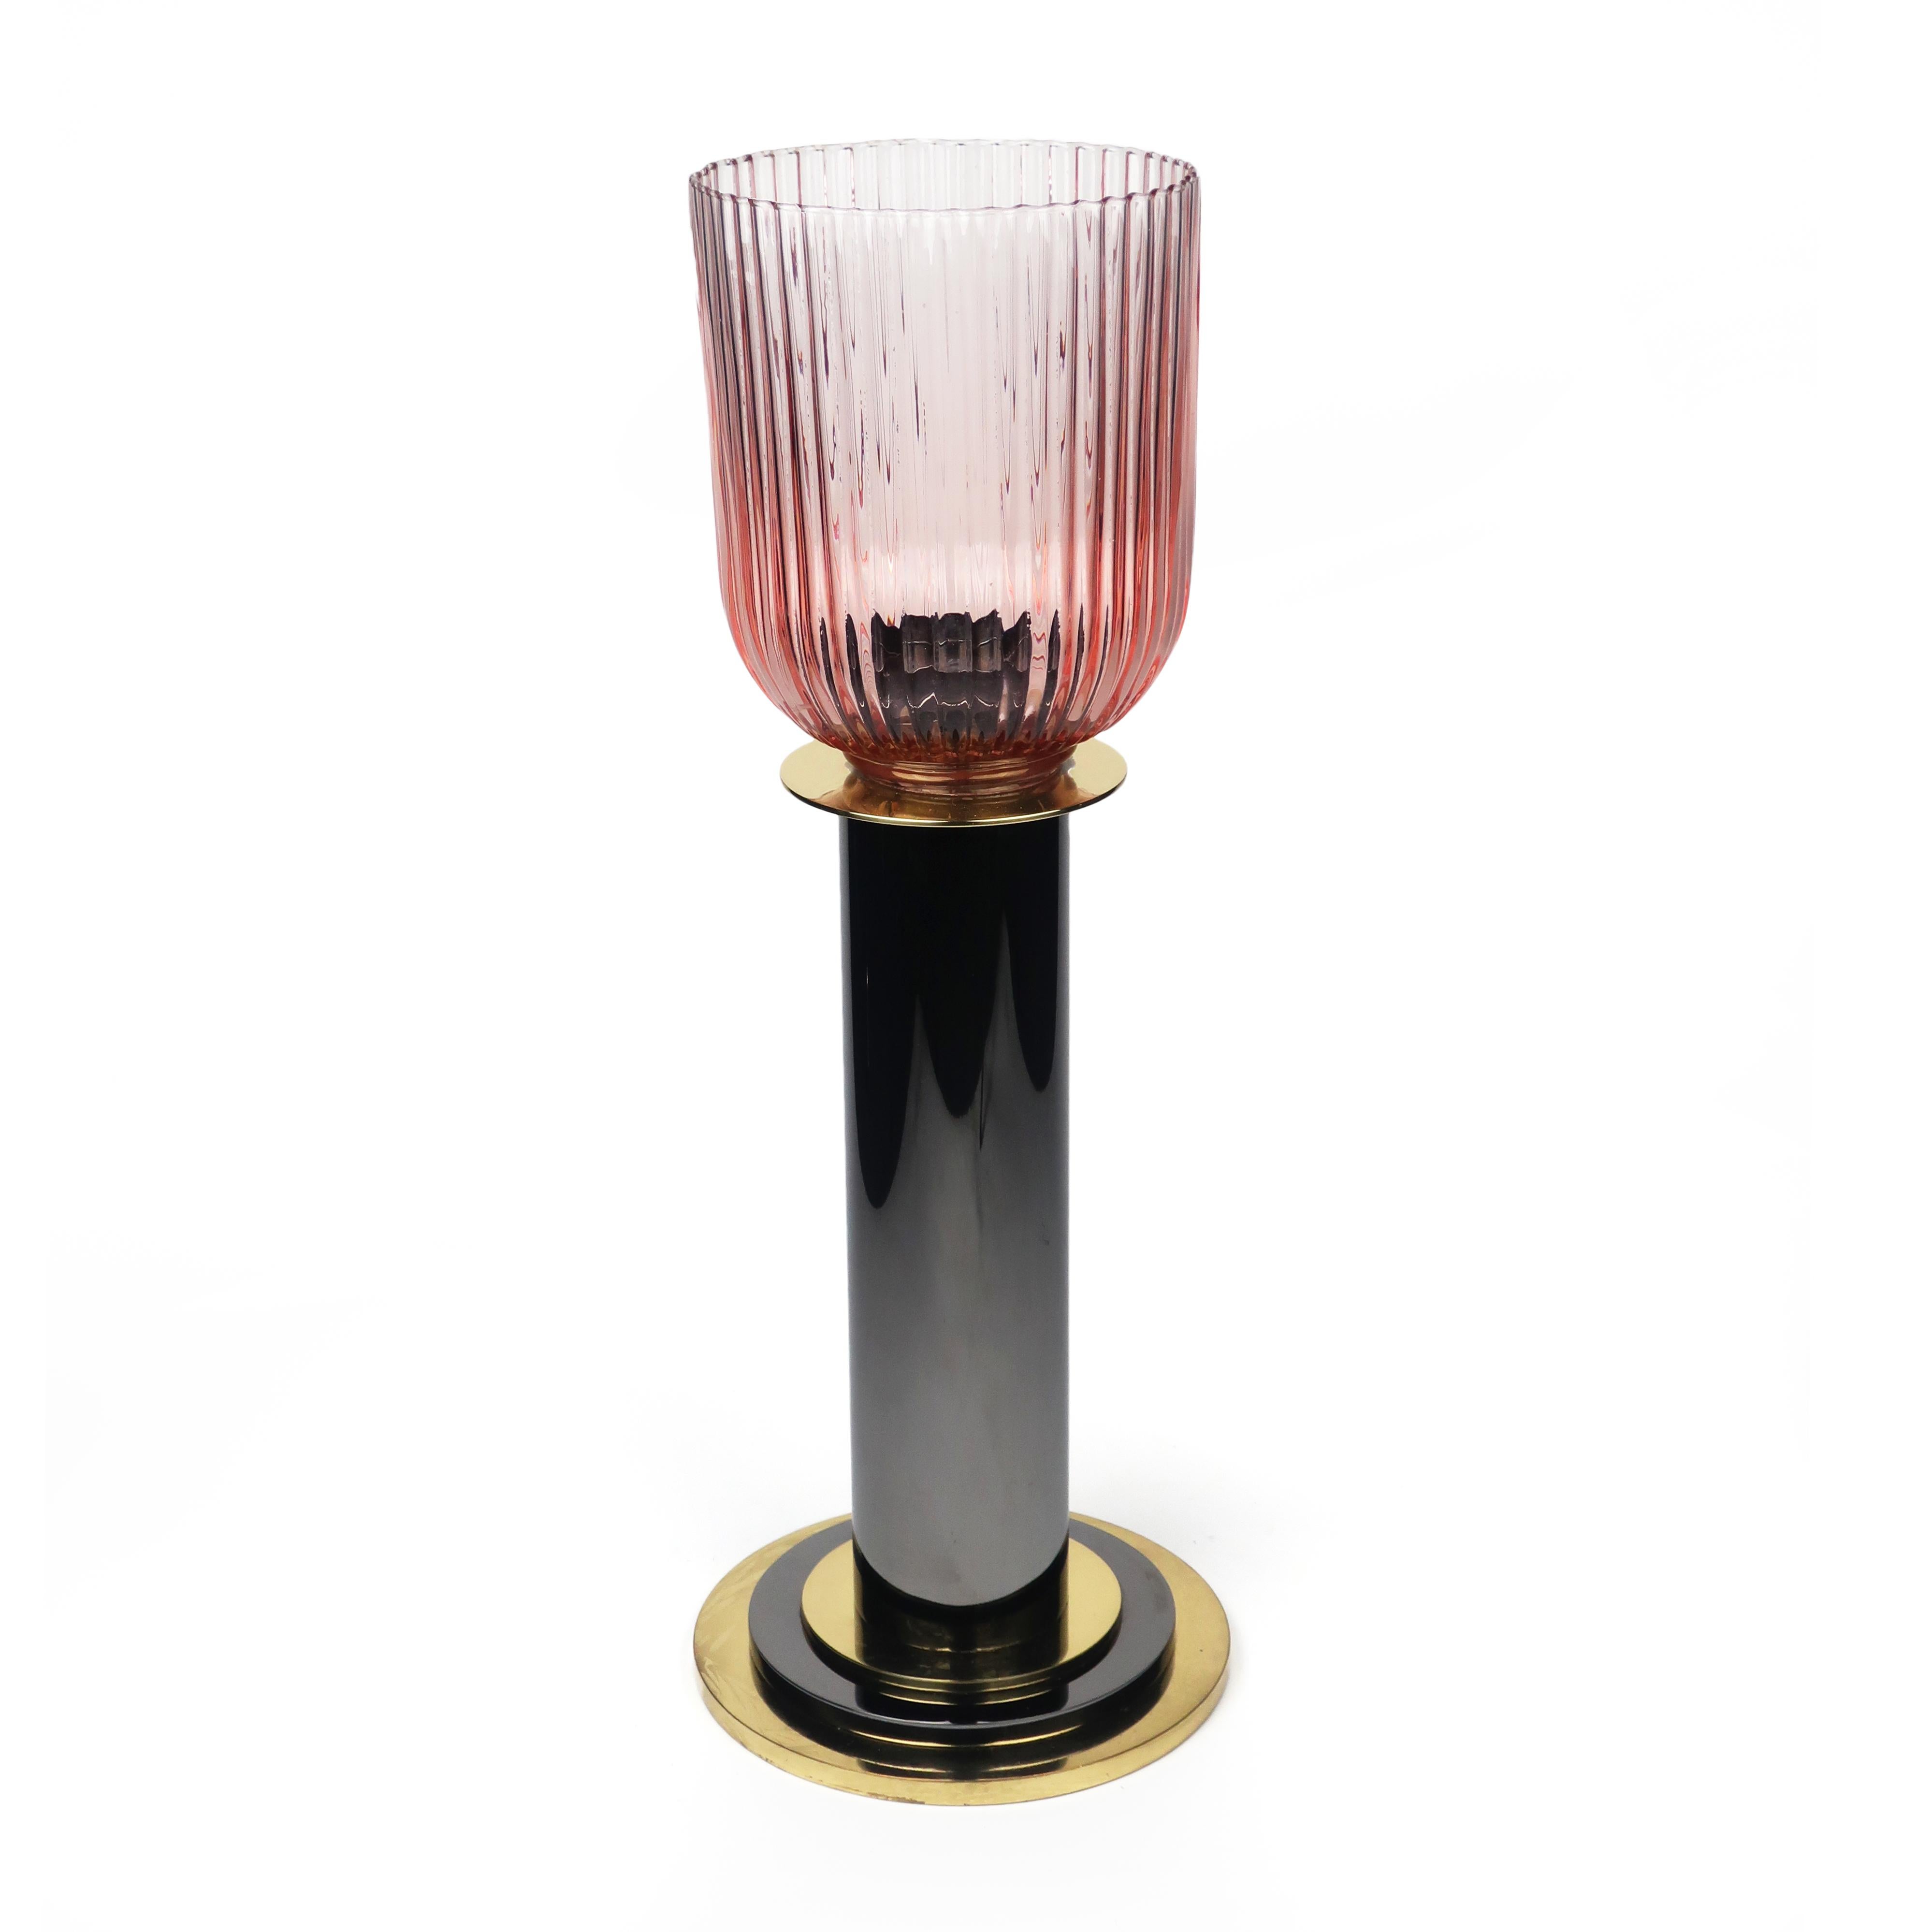 A large candleholder with a brass and dark grey metal base and a pink glass hurricane shade. Purchased from Lorin Marsh in the 1980s, this piece shows both a Memphis Milano and Art Deco design influence.

In excellent condition with wear